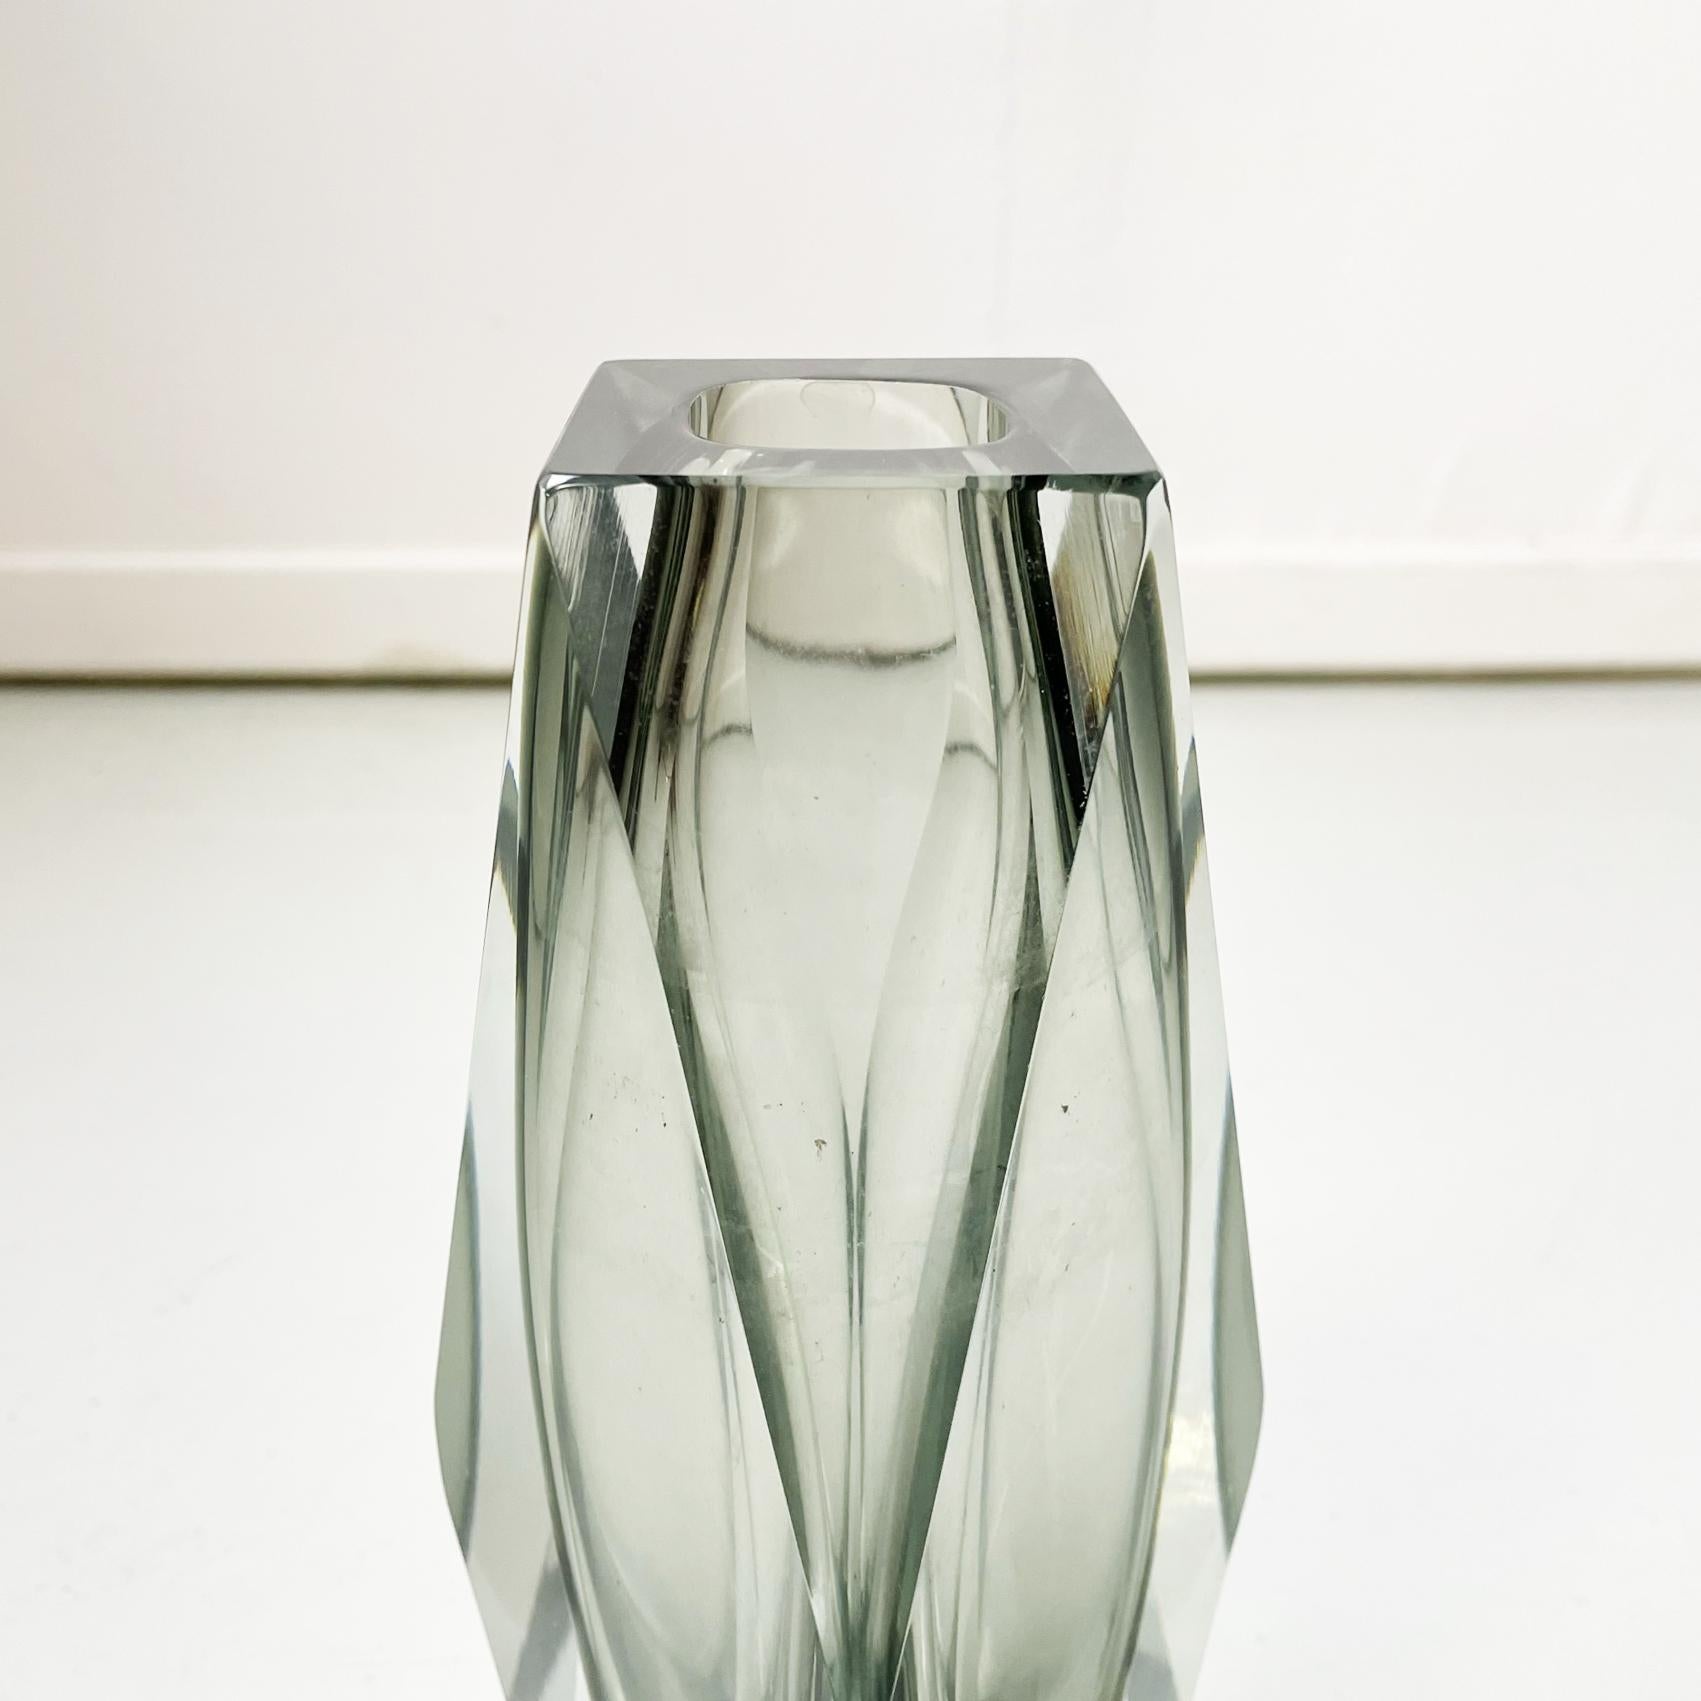 Late 20th Century Italian Modern Vase in Grey Murano Glass from the I Sommersi Series, 1970s For Sale